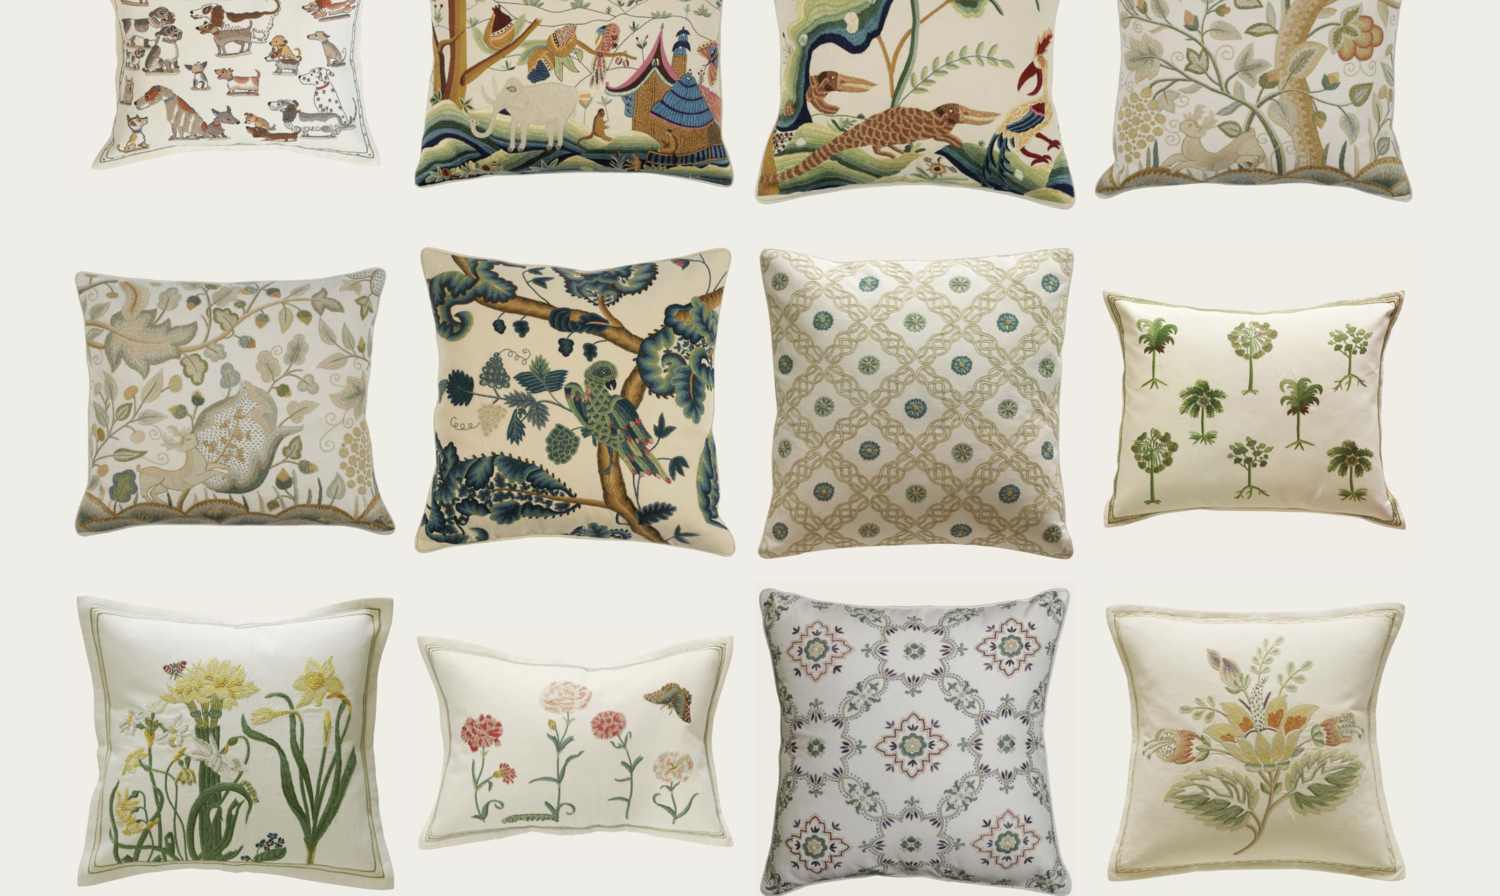 A selection of some of the cushions at Chelsea Textiles